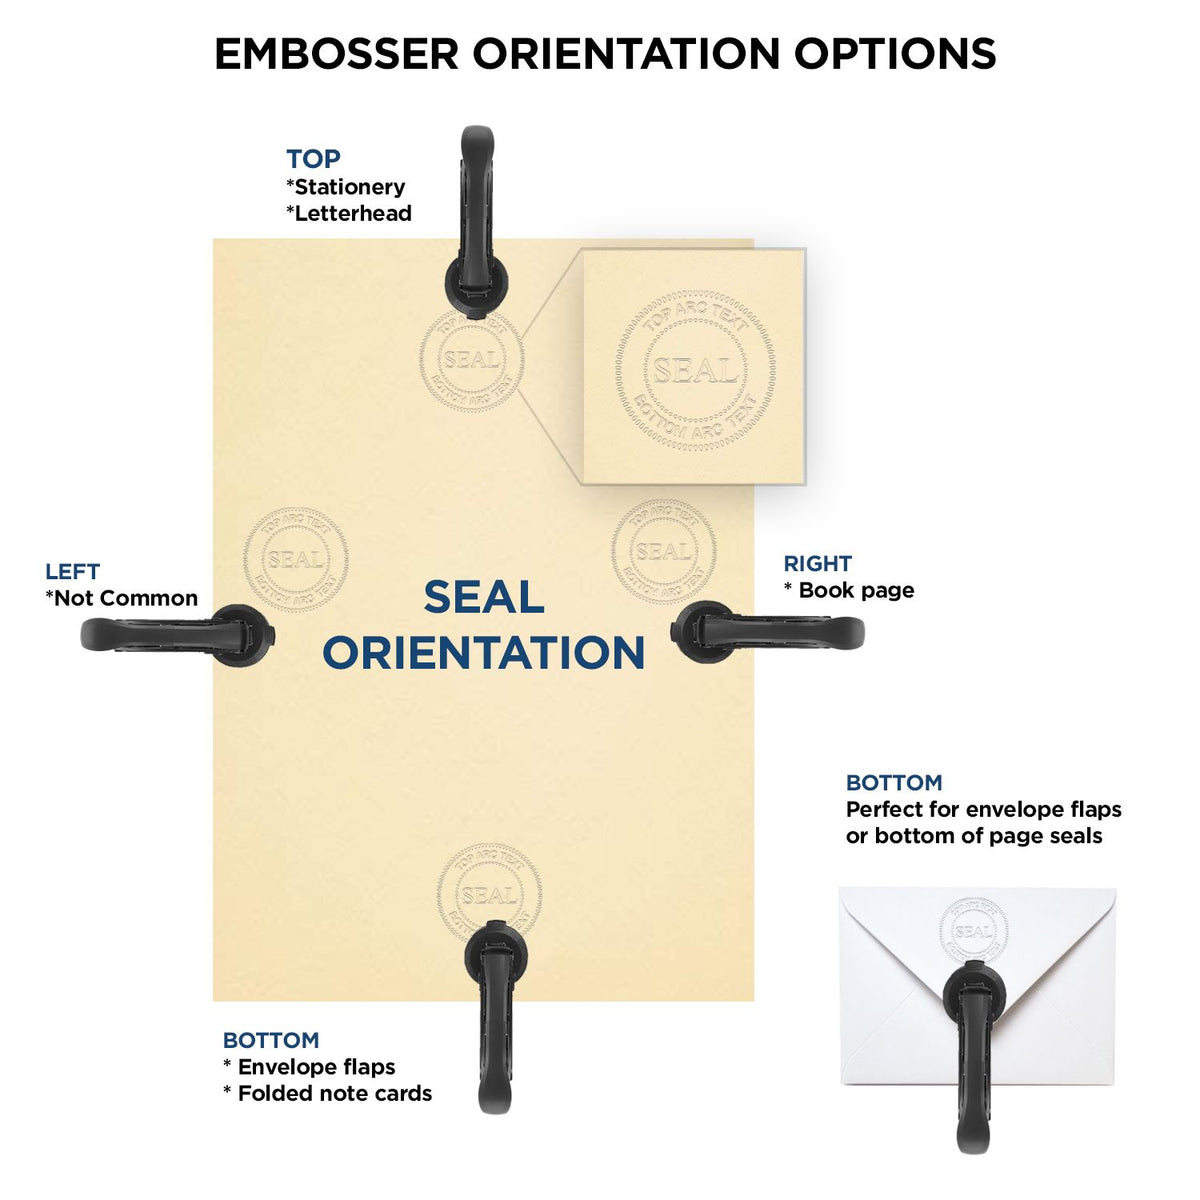 An infographic for the State of New Mexico Extended Long Reach Geologist Seal showing embosser orientation, this is showing examples of a top, bottom, right and left insert.